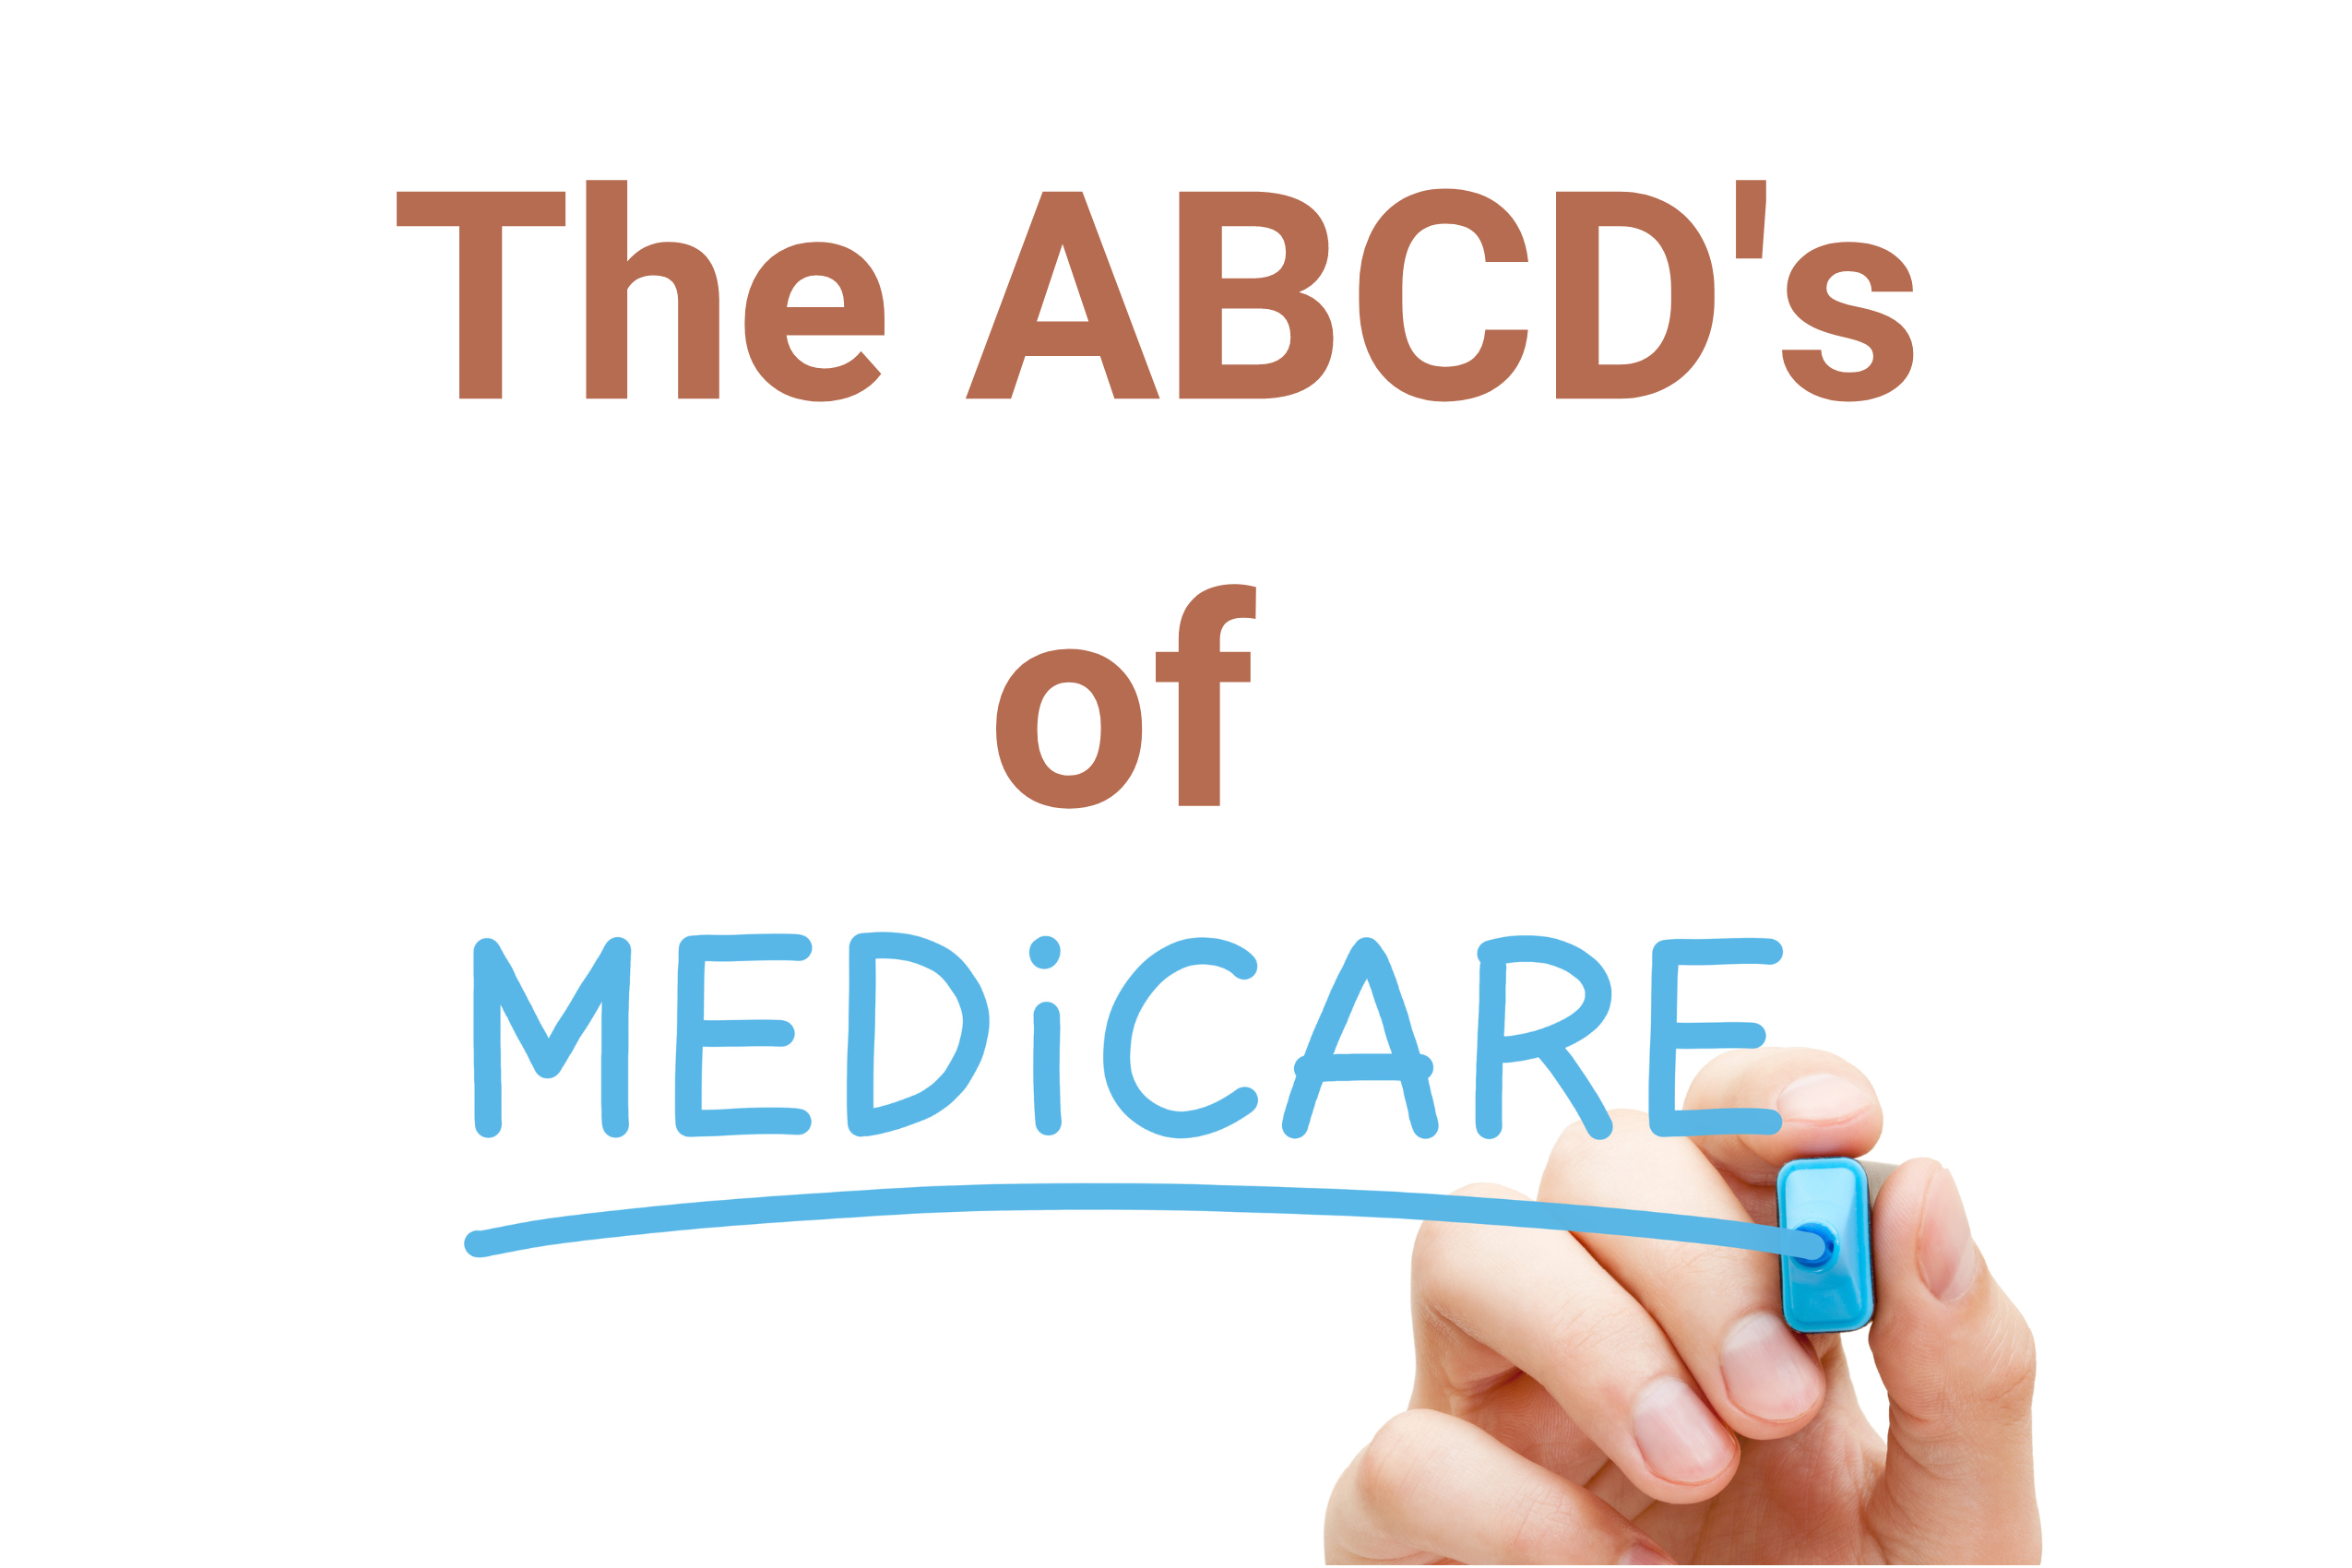 The ABCD's of Medicare hand writing the words on screen